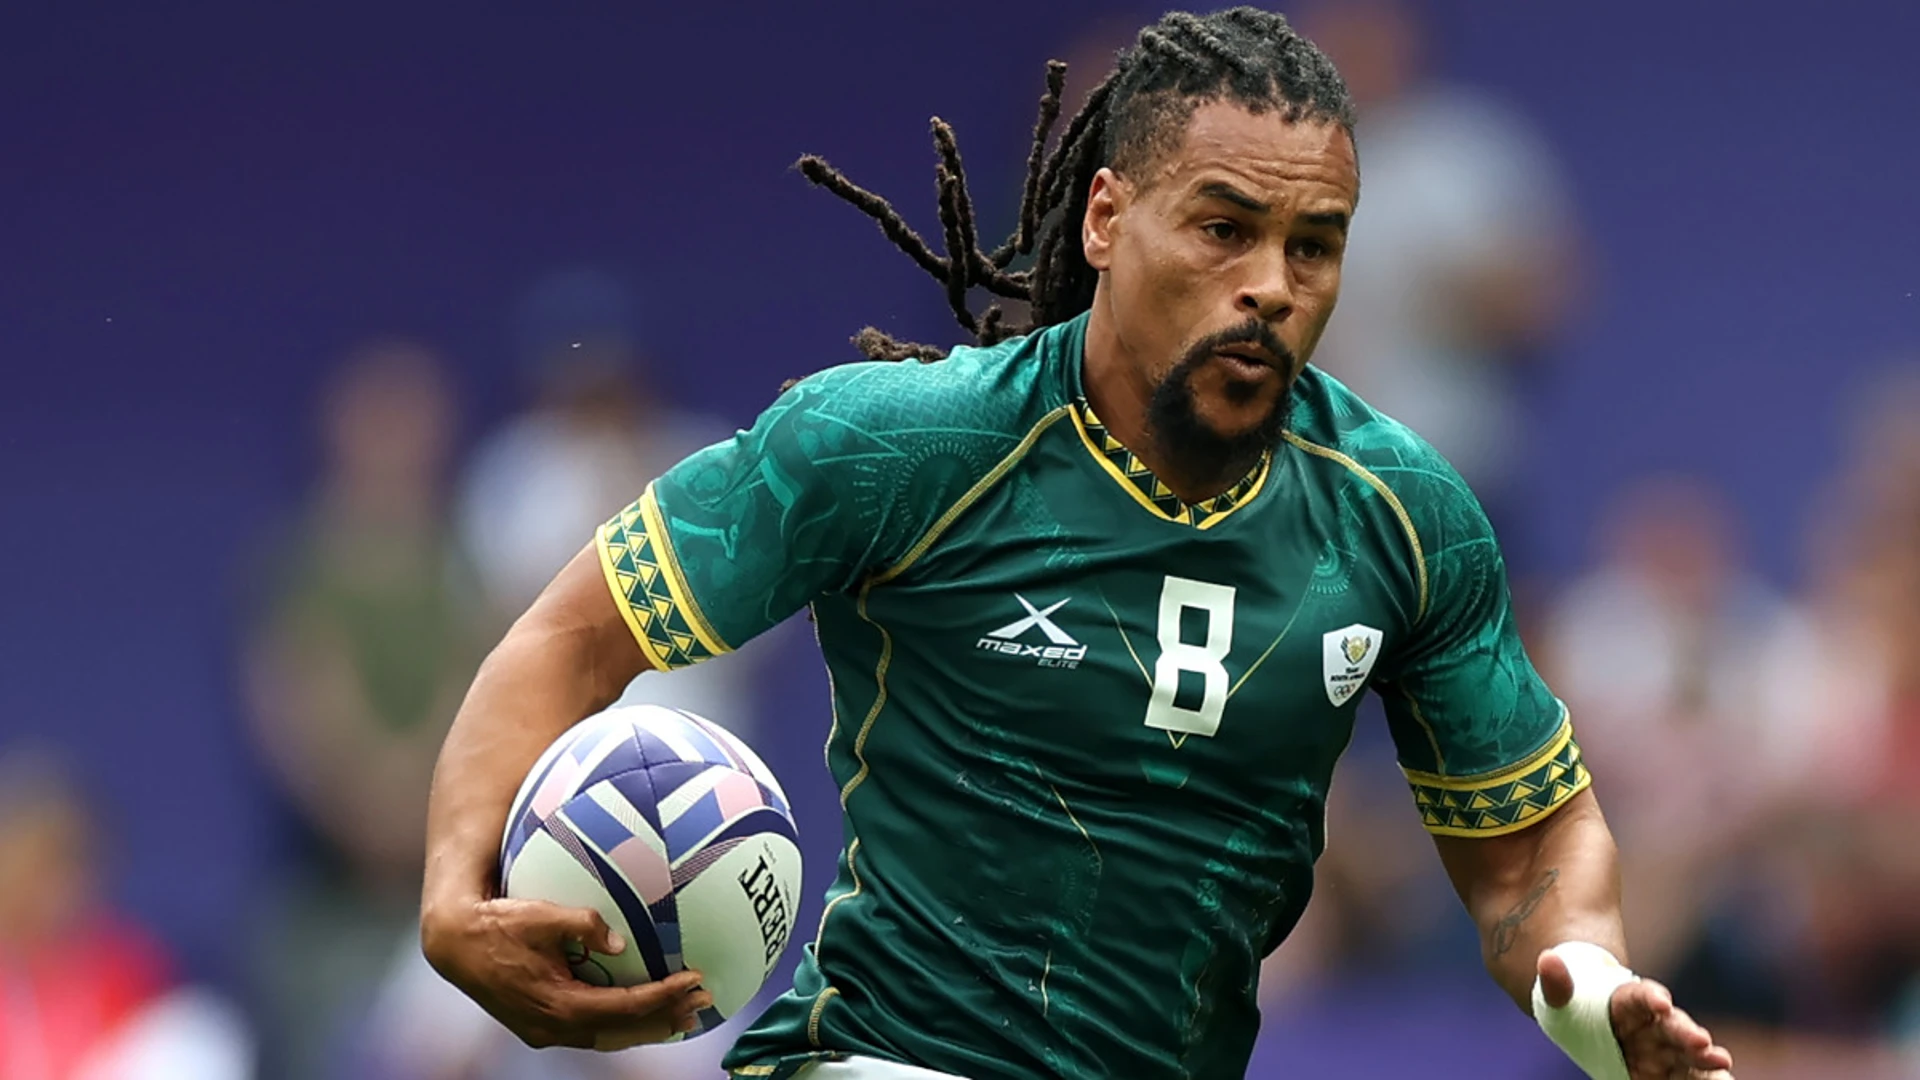 Blitzboks sneak into Olympic quarters, book rematch with All Blacks